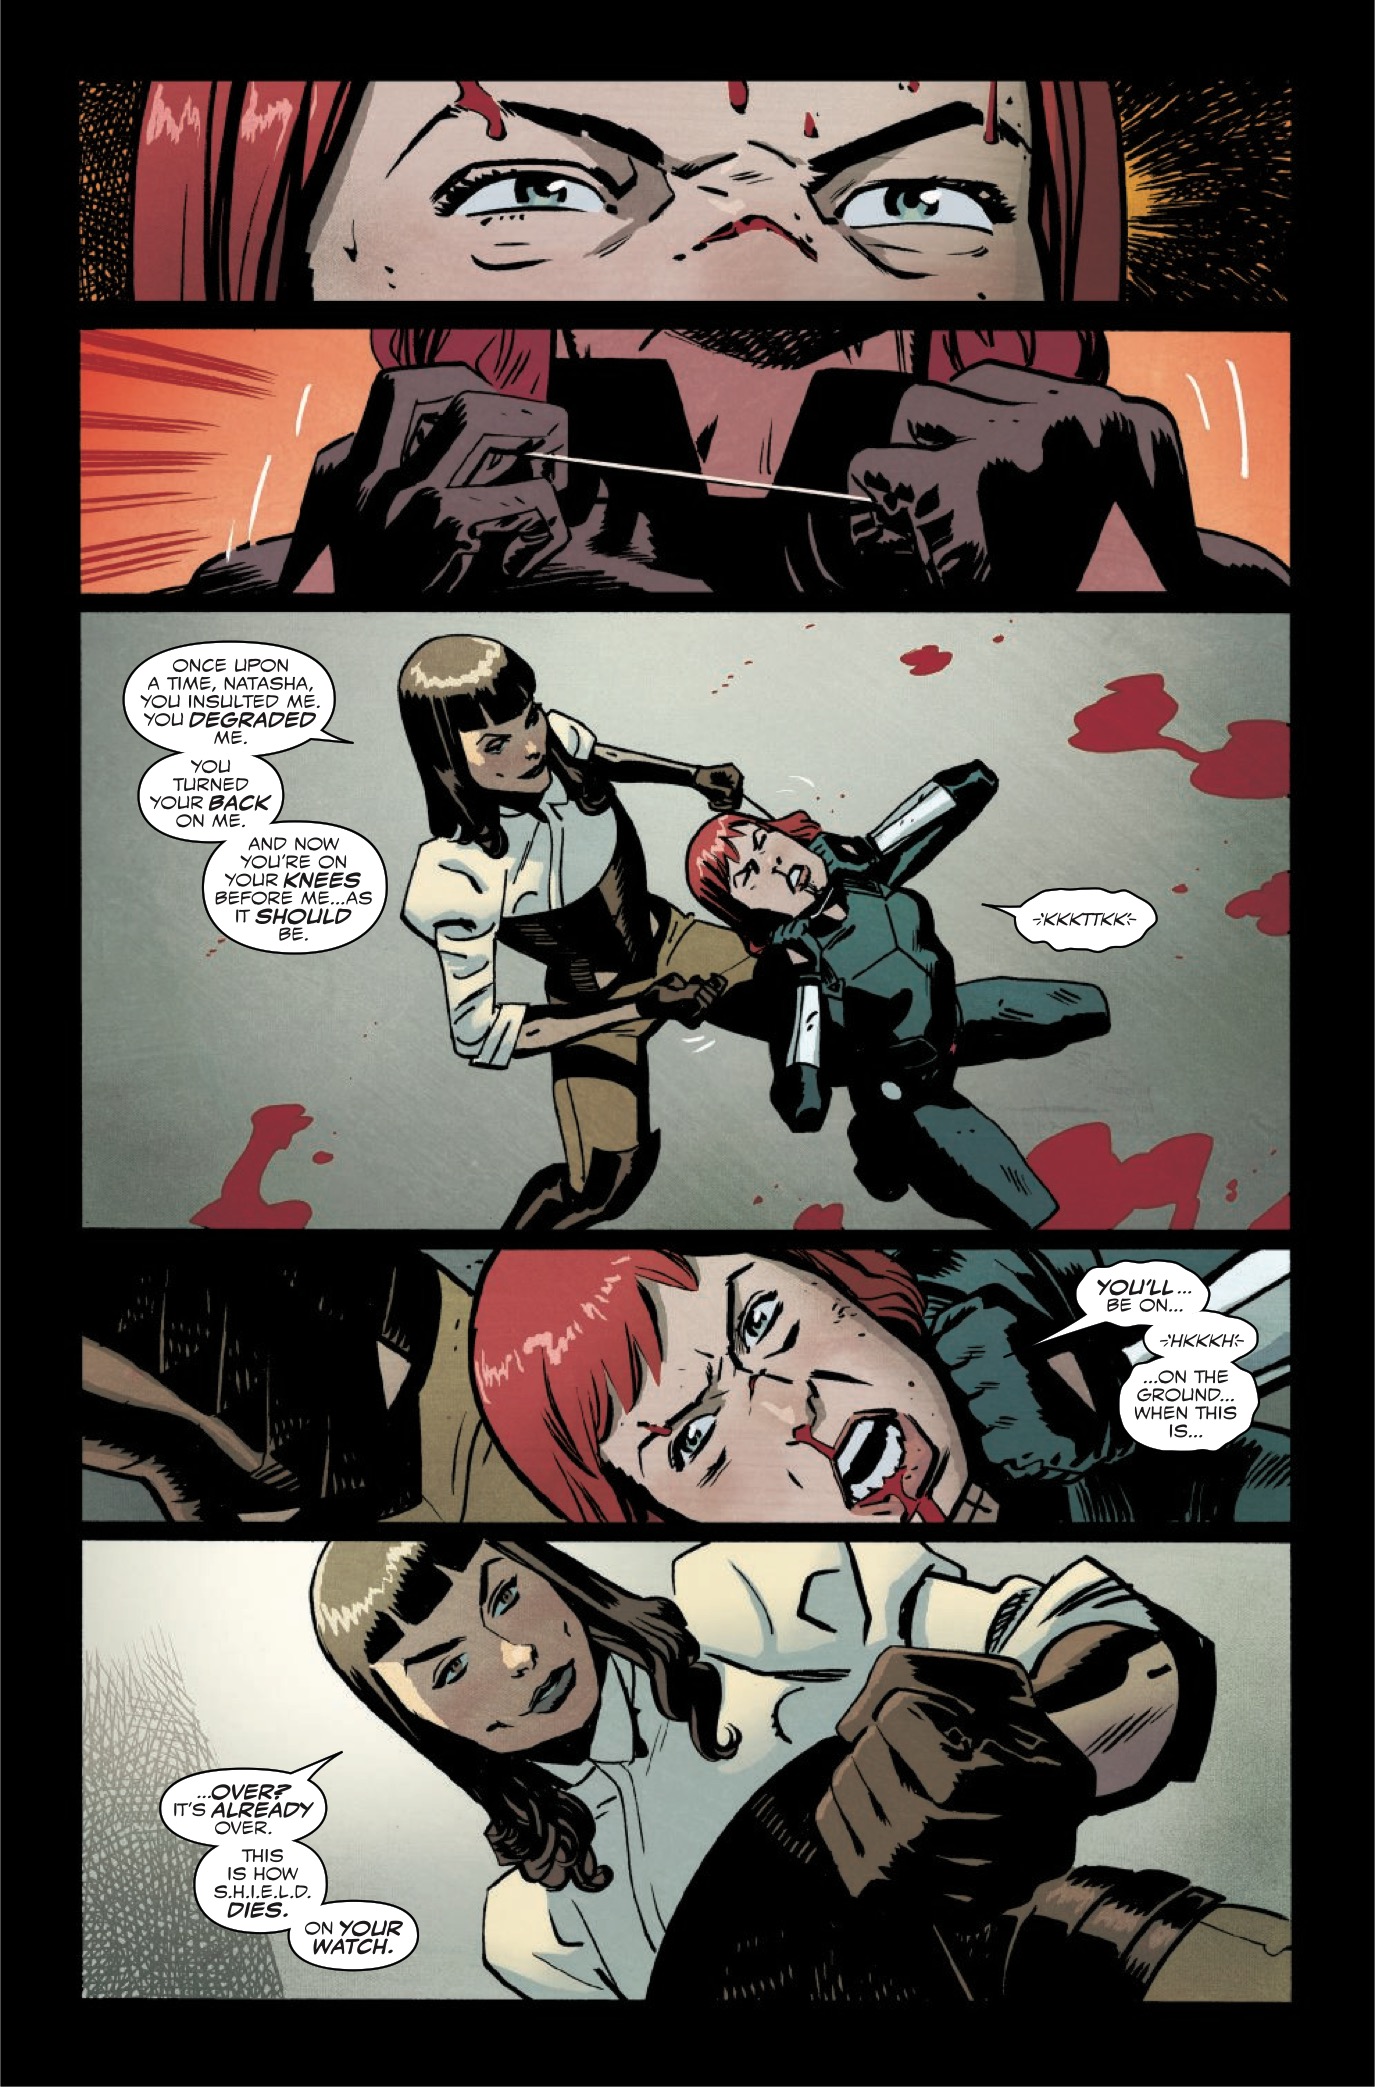 Marvel Preview: Black Widow #12